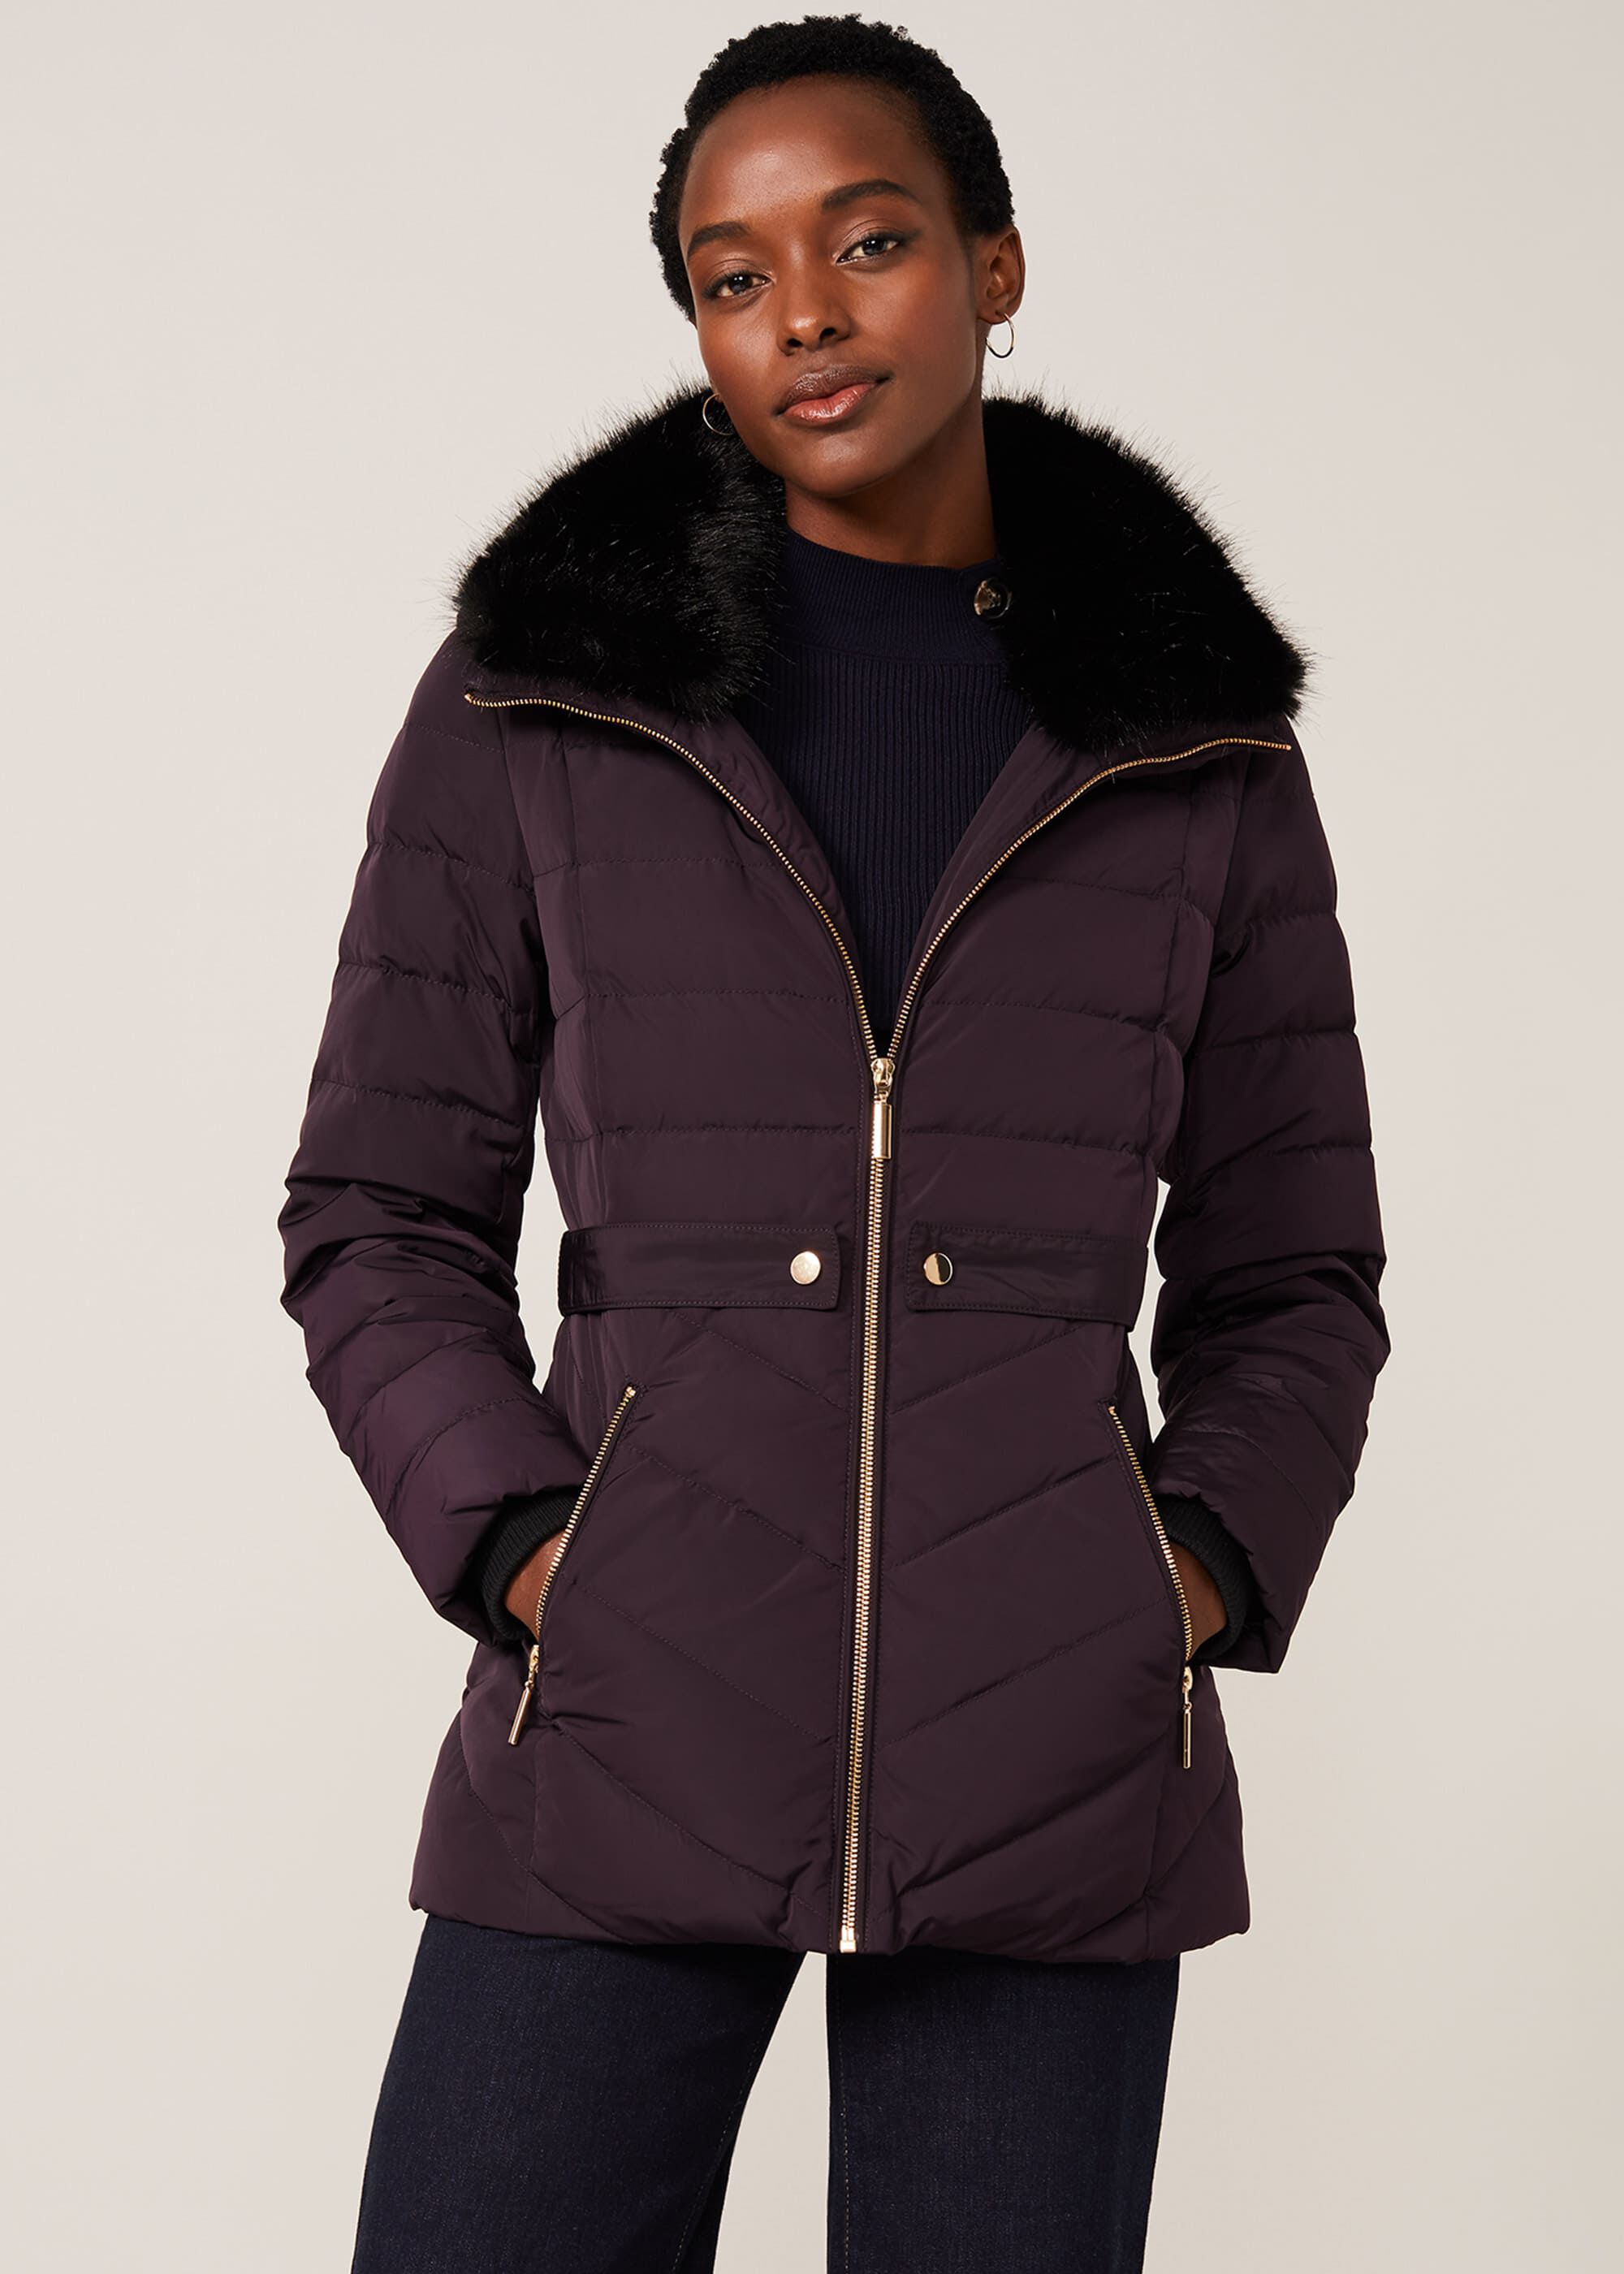 Phase 8 Coats Sale Online Sale, UP TO 60% OFF